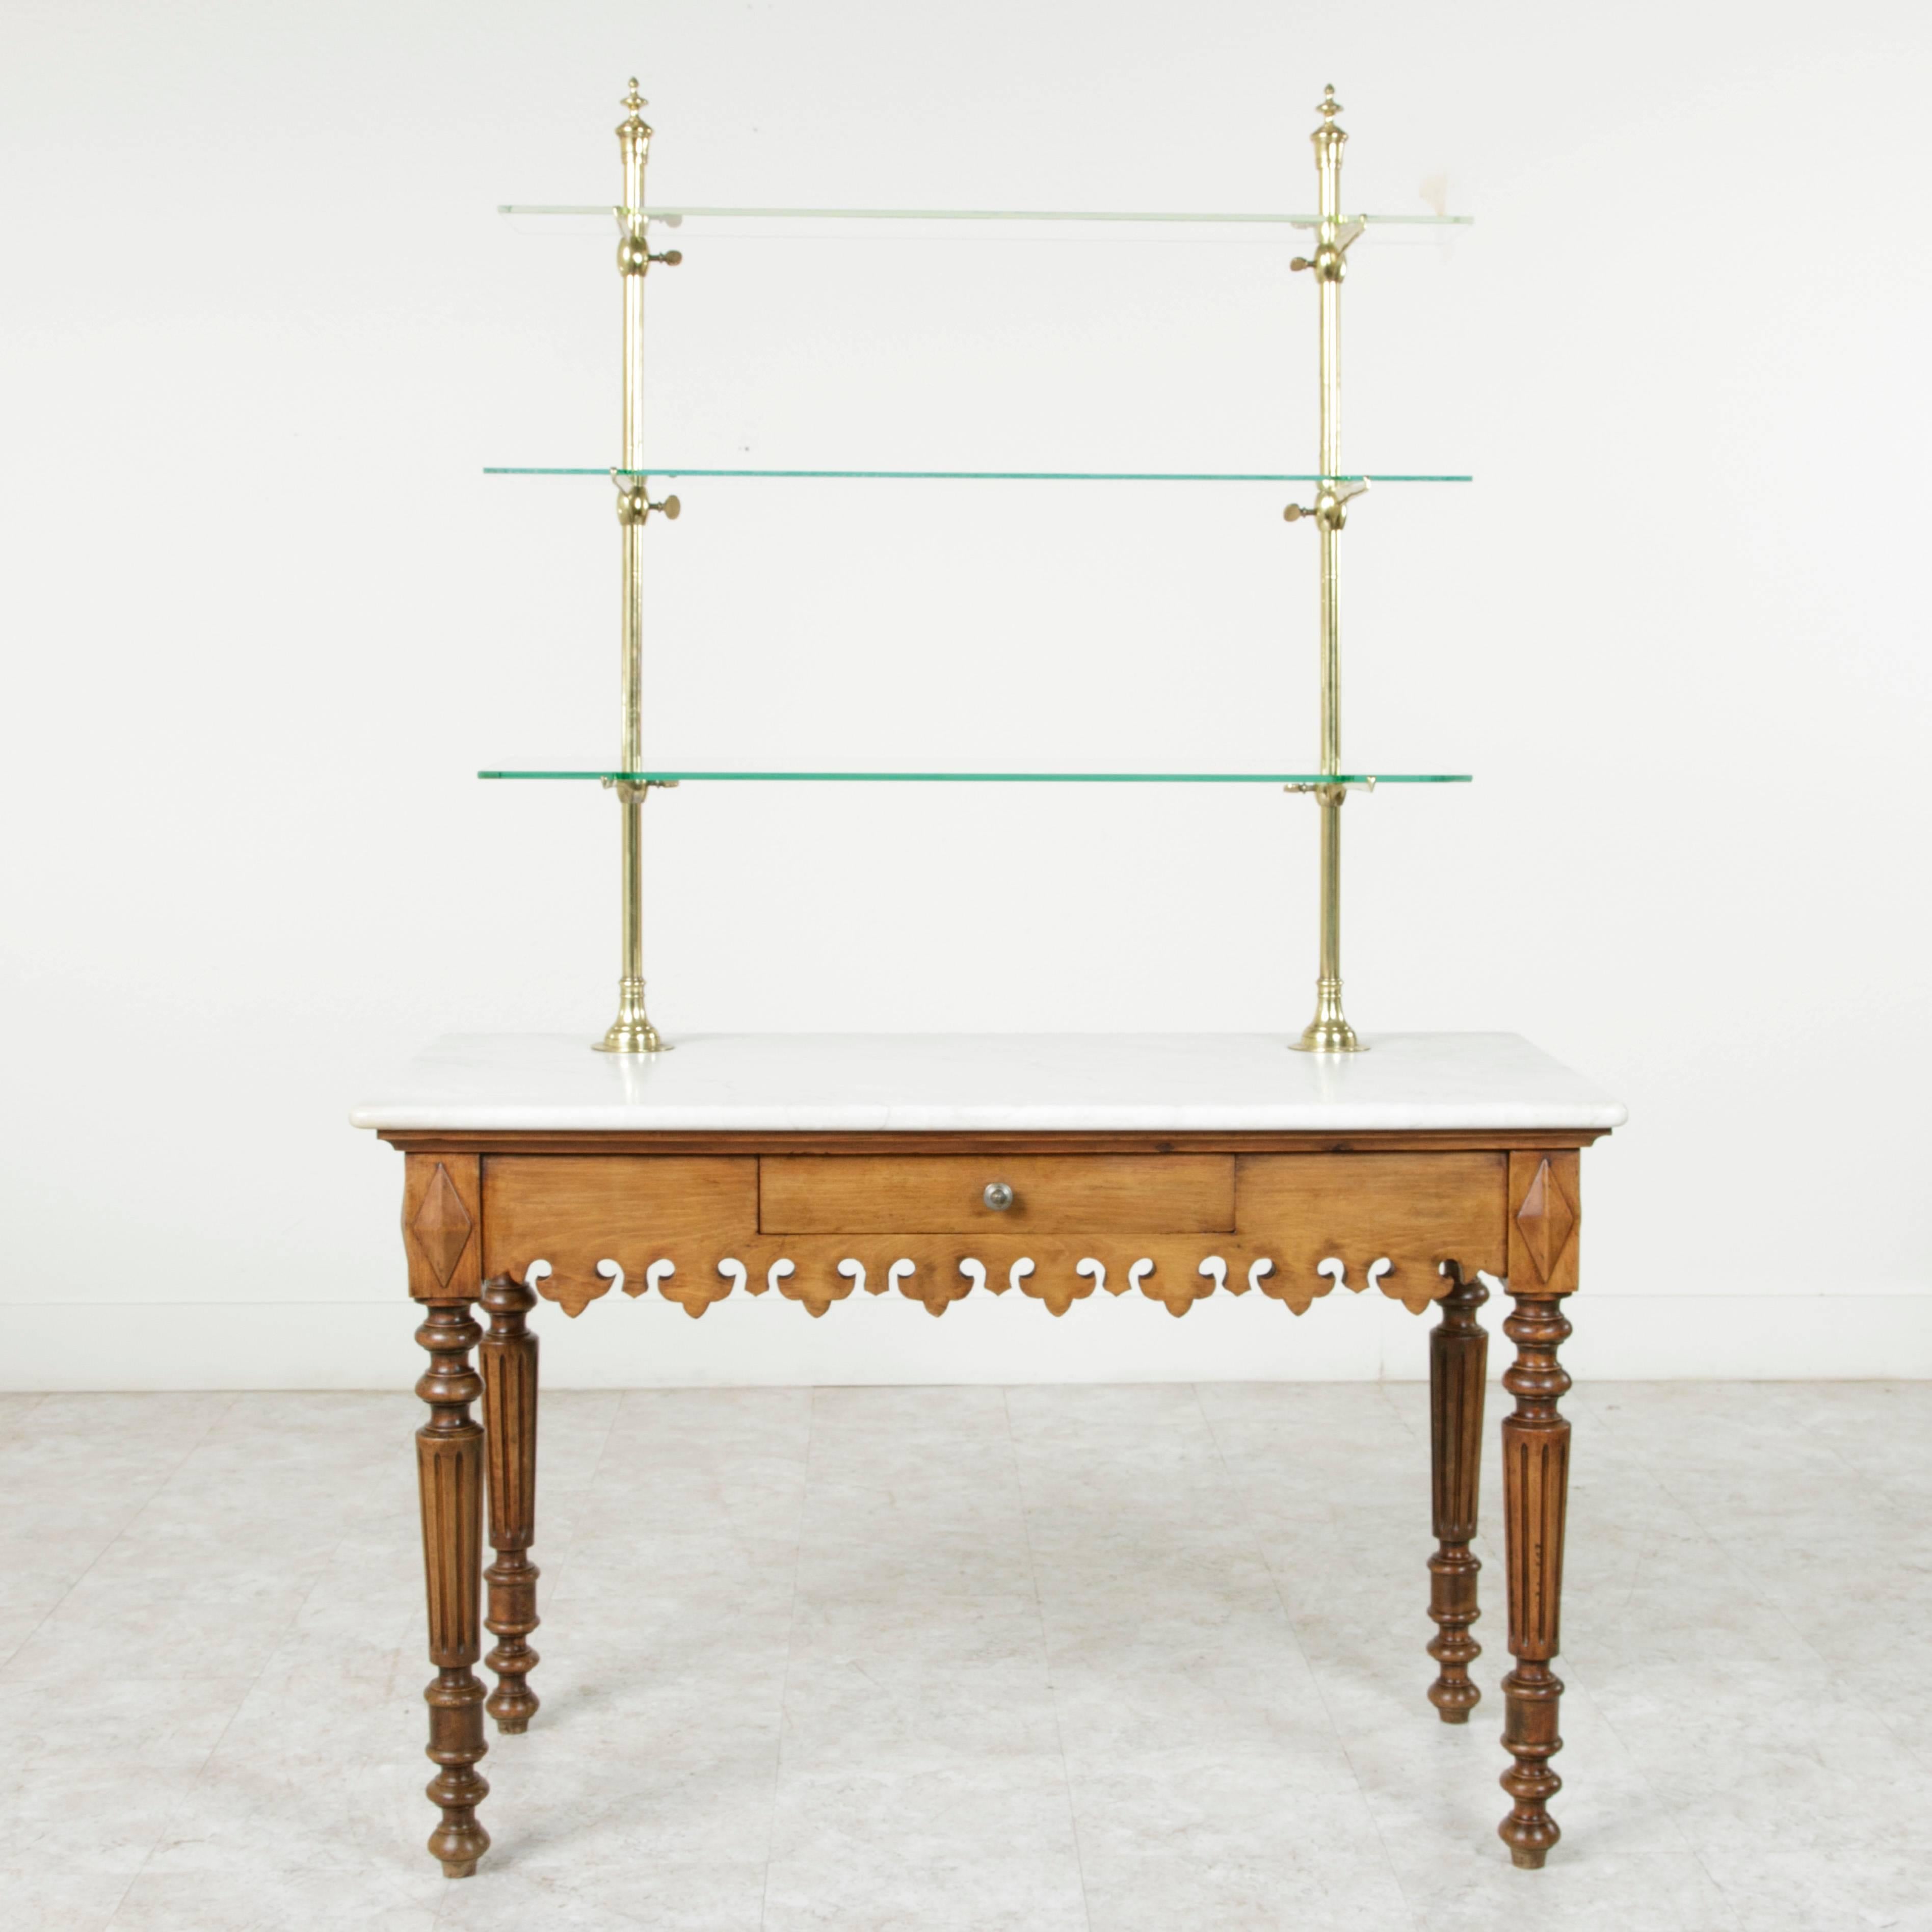 An extremely rare find, this airy and entirely unique pastry table etagere will make an impressive showcase in a kitchen, pantry, or shop space. The table is constructed of heart pine with finely turned and fluted legs beneath a pierced Fleur de Lys